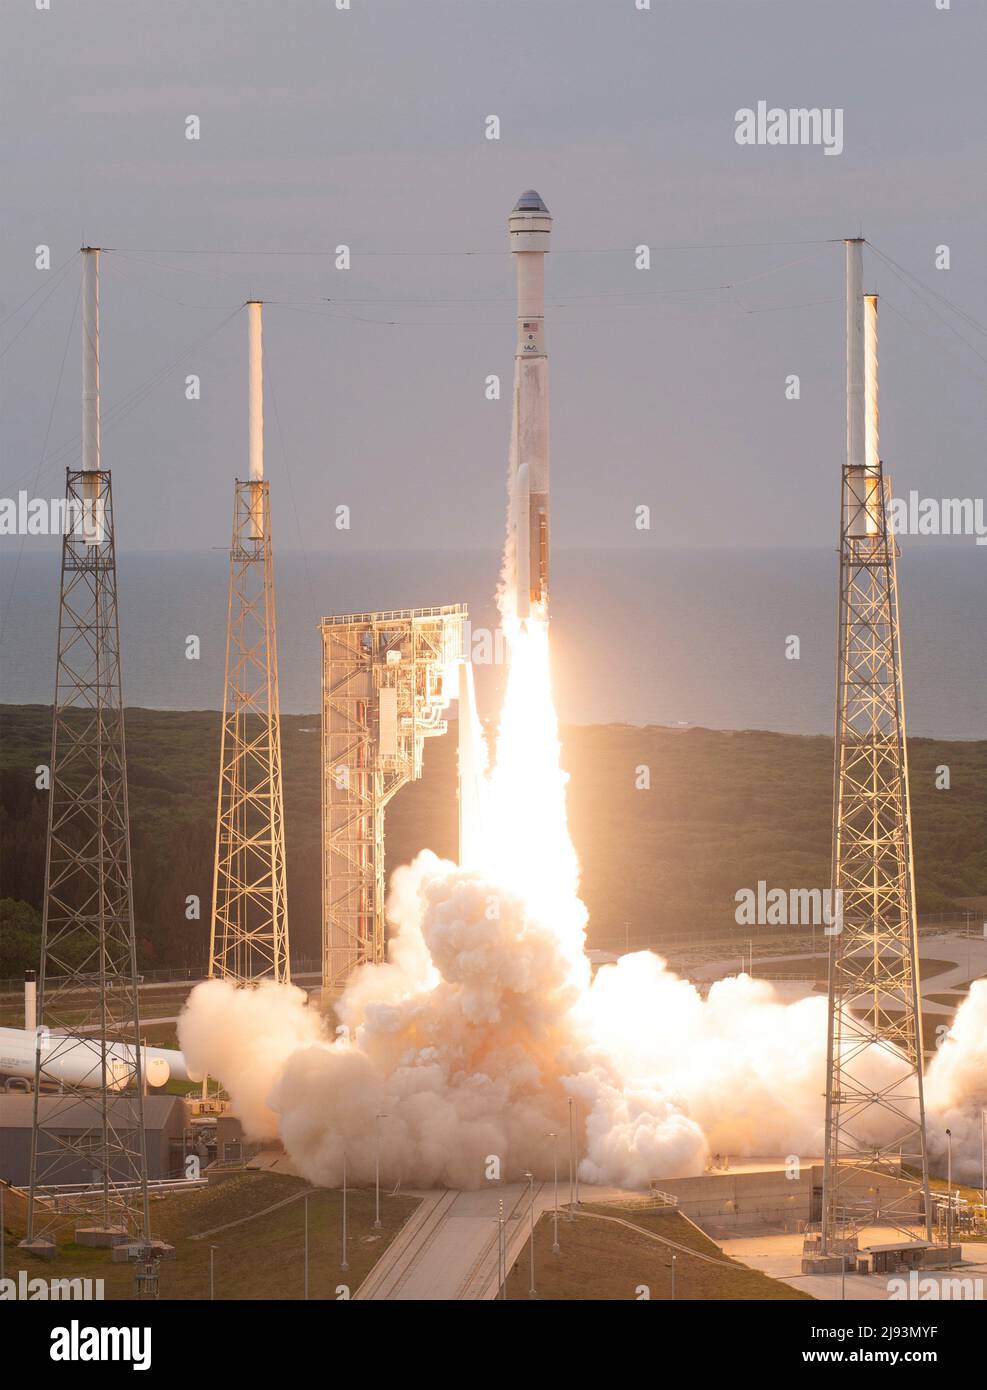 Cape Canaveral, United States of America. 19 May, 2022. The United Launch Alliance Atlas V rocket carrying the Boeing CST-100 Starliner spacecraft lifts off from Space Launch Complex 41, May 19, 2022 in Cape Canaveral, Florida. The successful Orbital Flight Test-2 is the second un-crewed flight test and will dock to the International Space Station. Credit: Joel Kowsky/NASA/Alamy Live News Stock Photo